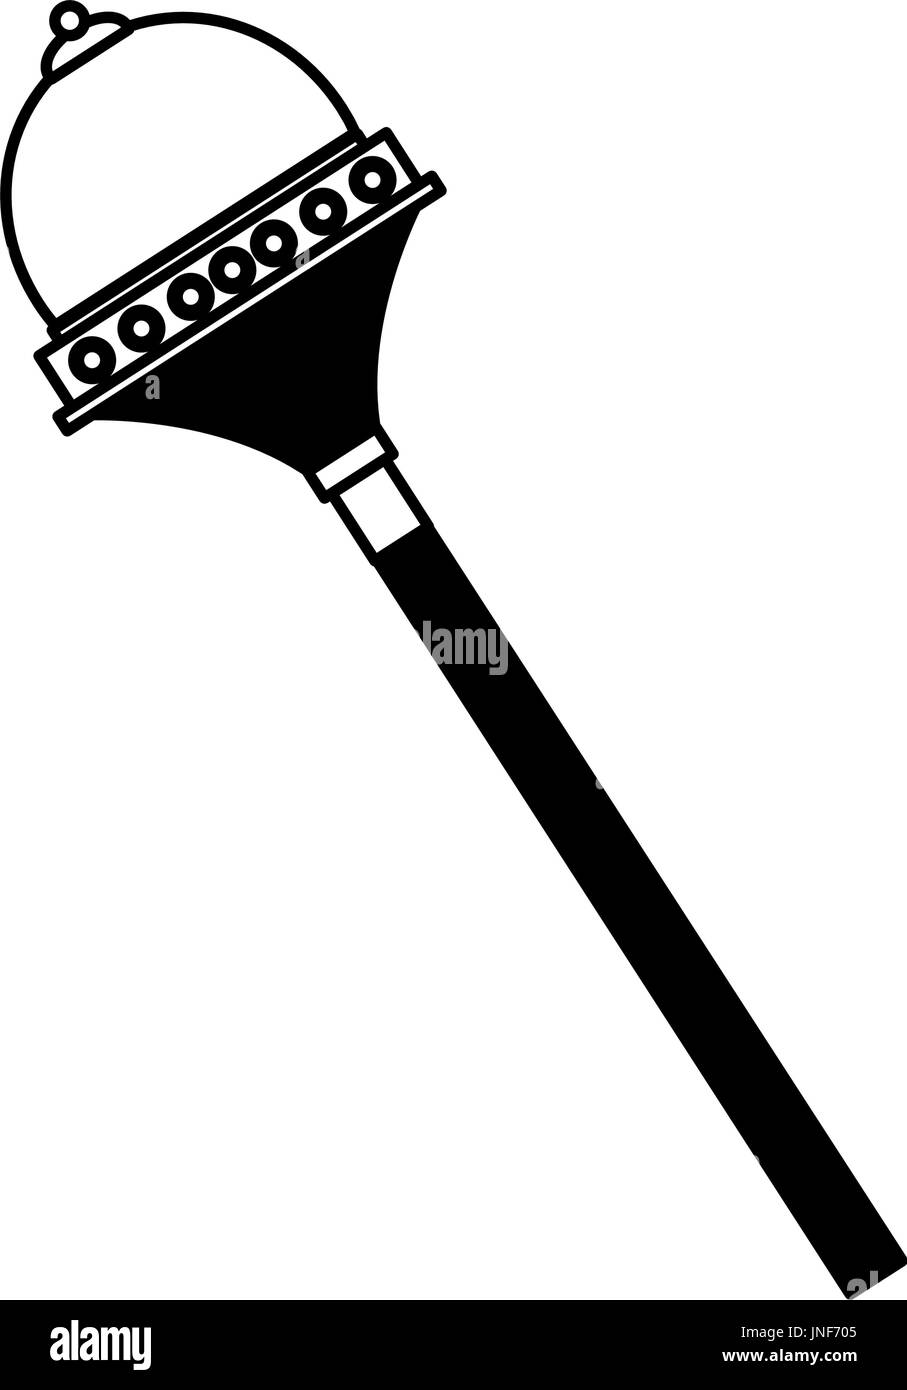 royal scepter accessory authority element Stock Vector